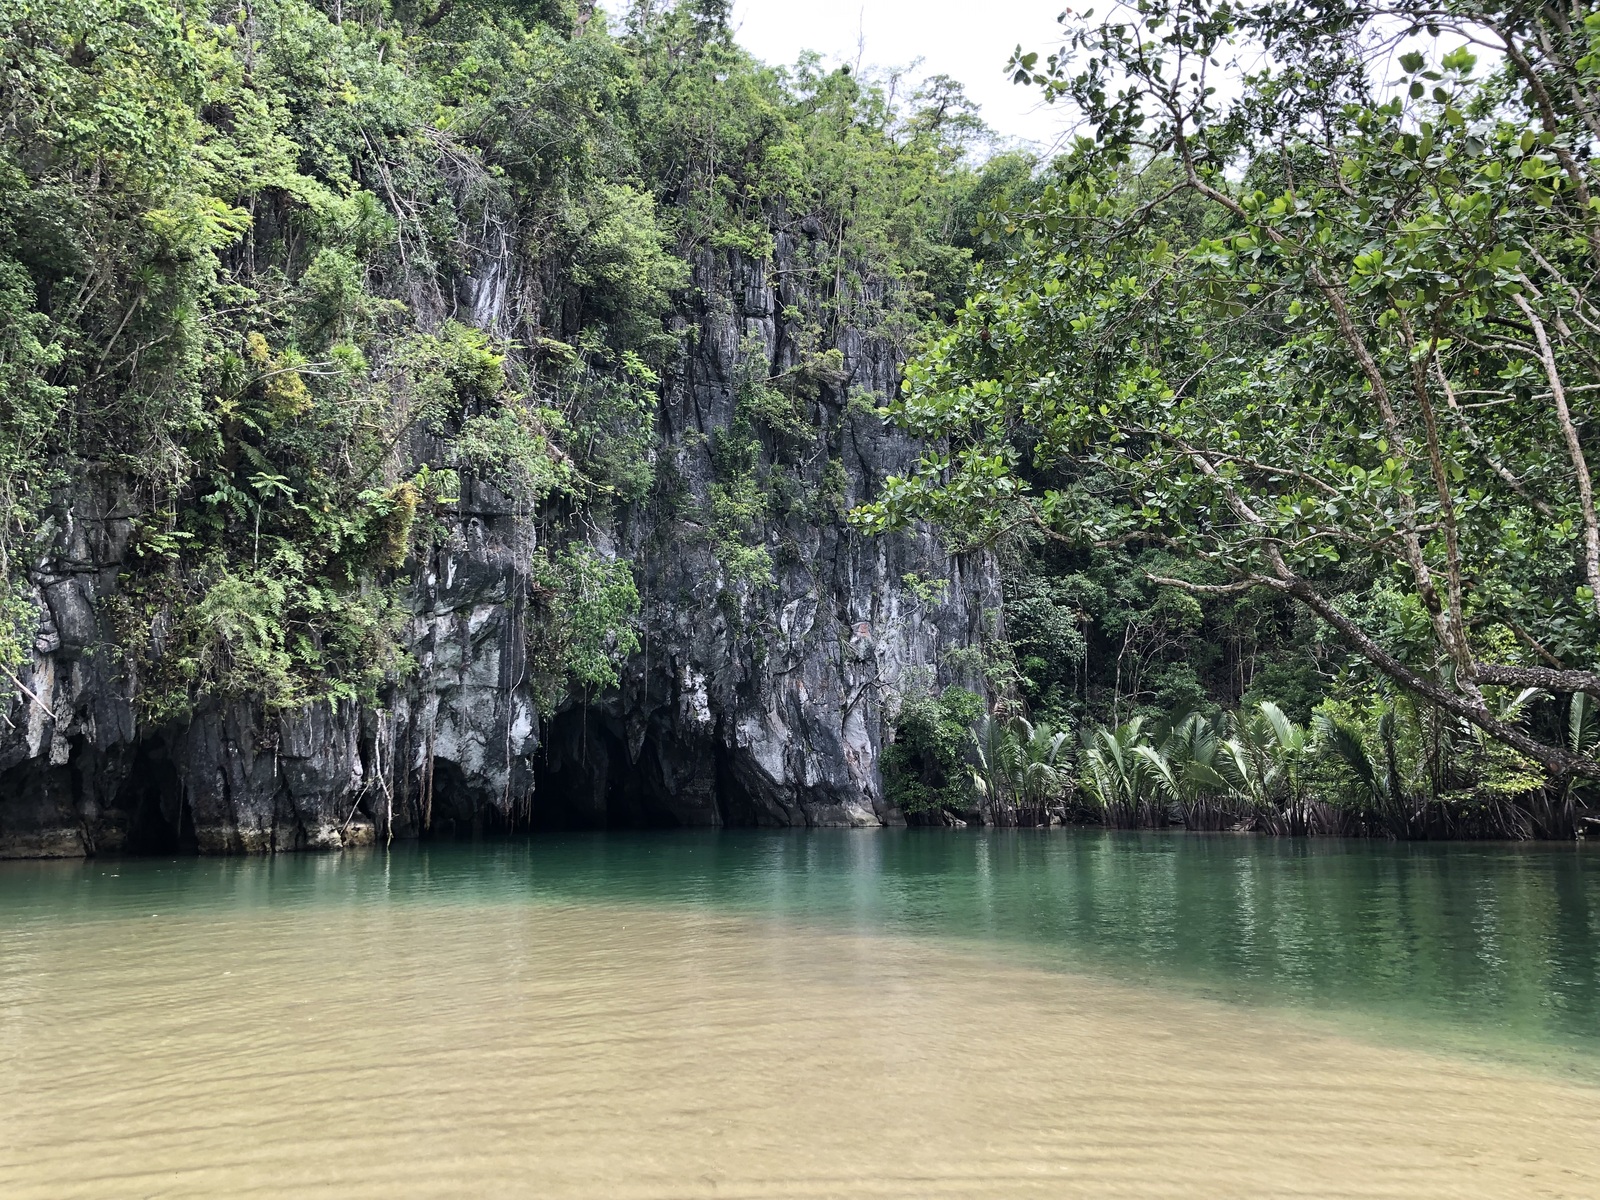 The entrance of the underground river cave.